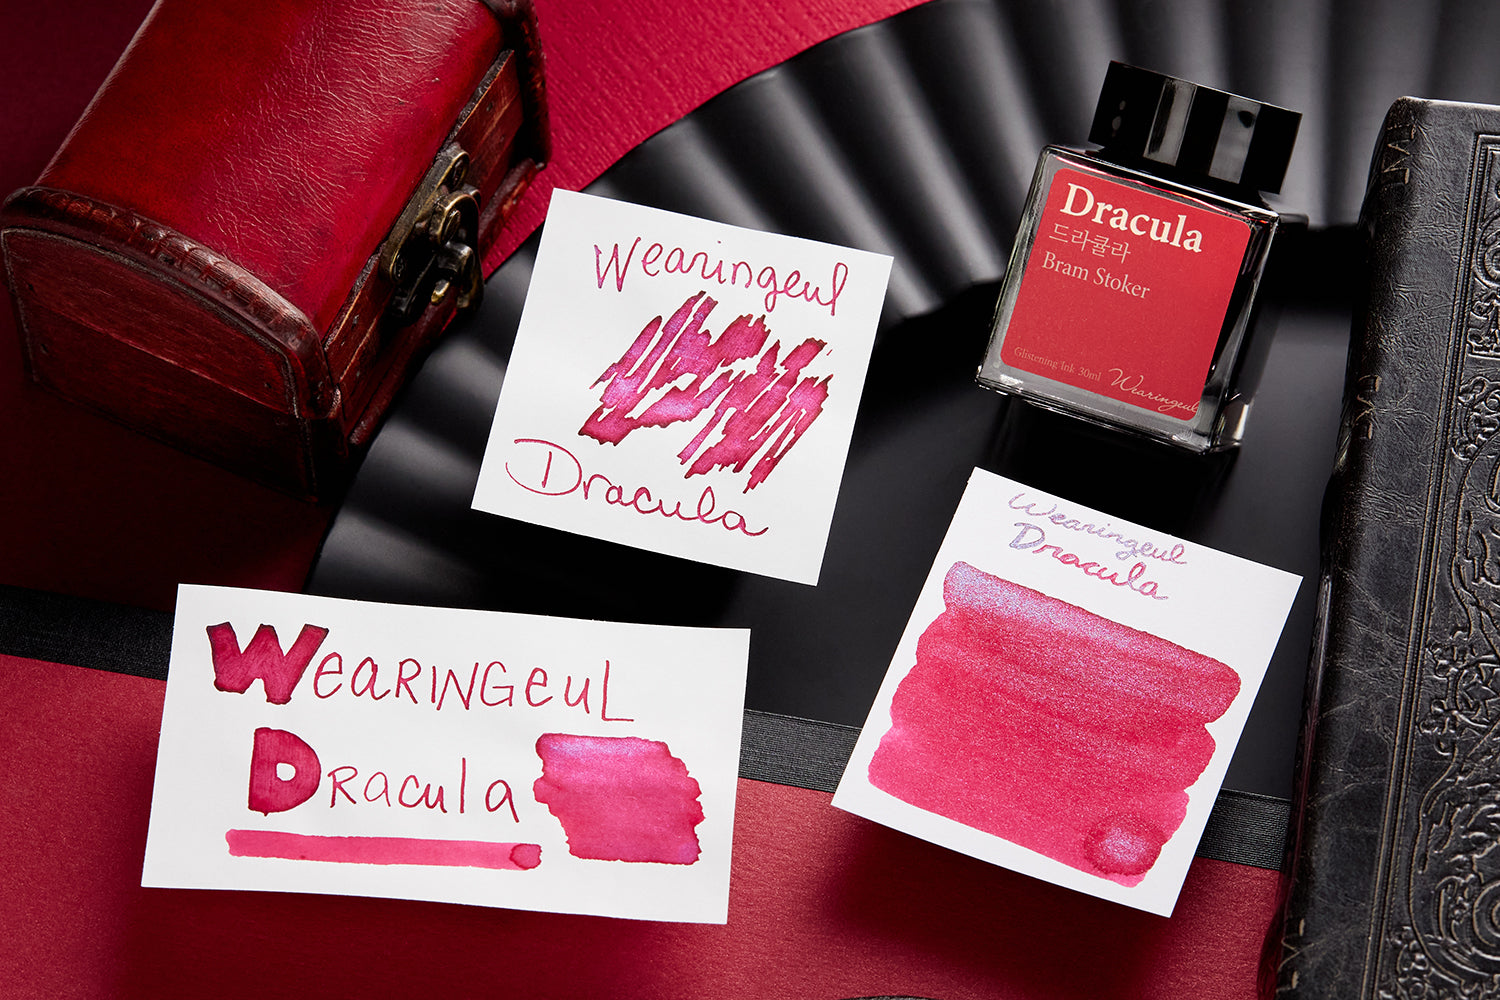 Wearingeul Dracula Fountain Pen Ink writing sample, bottle and swab on black and red textured background